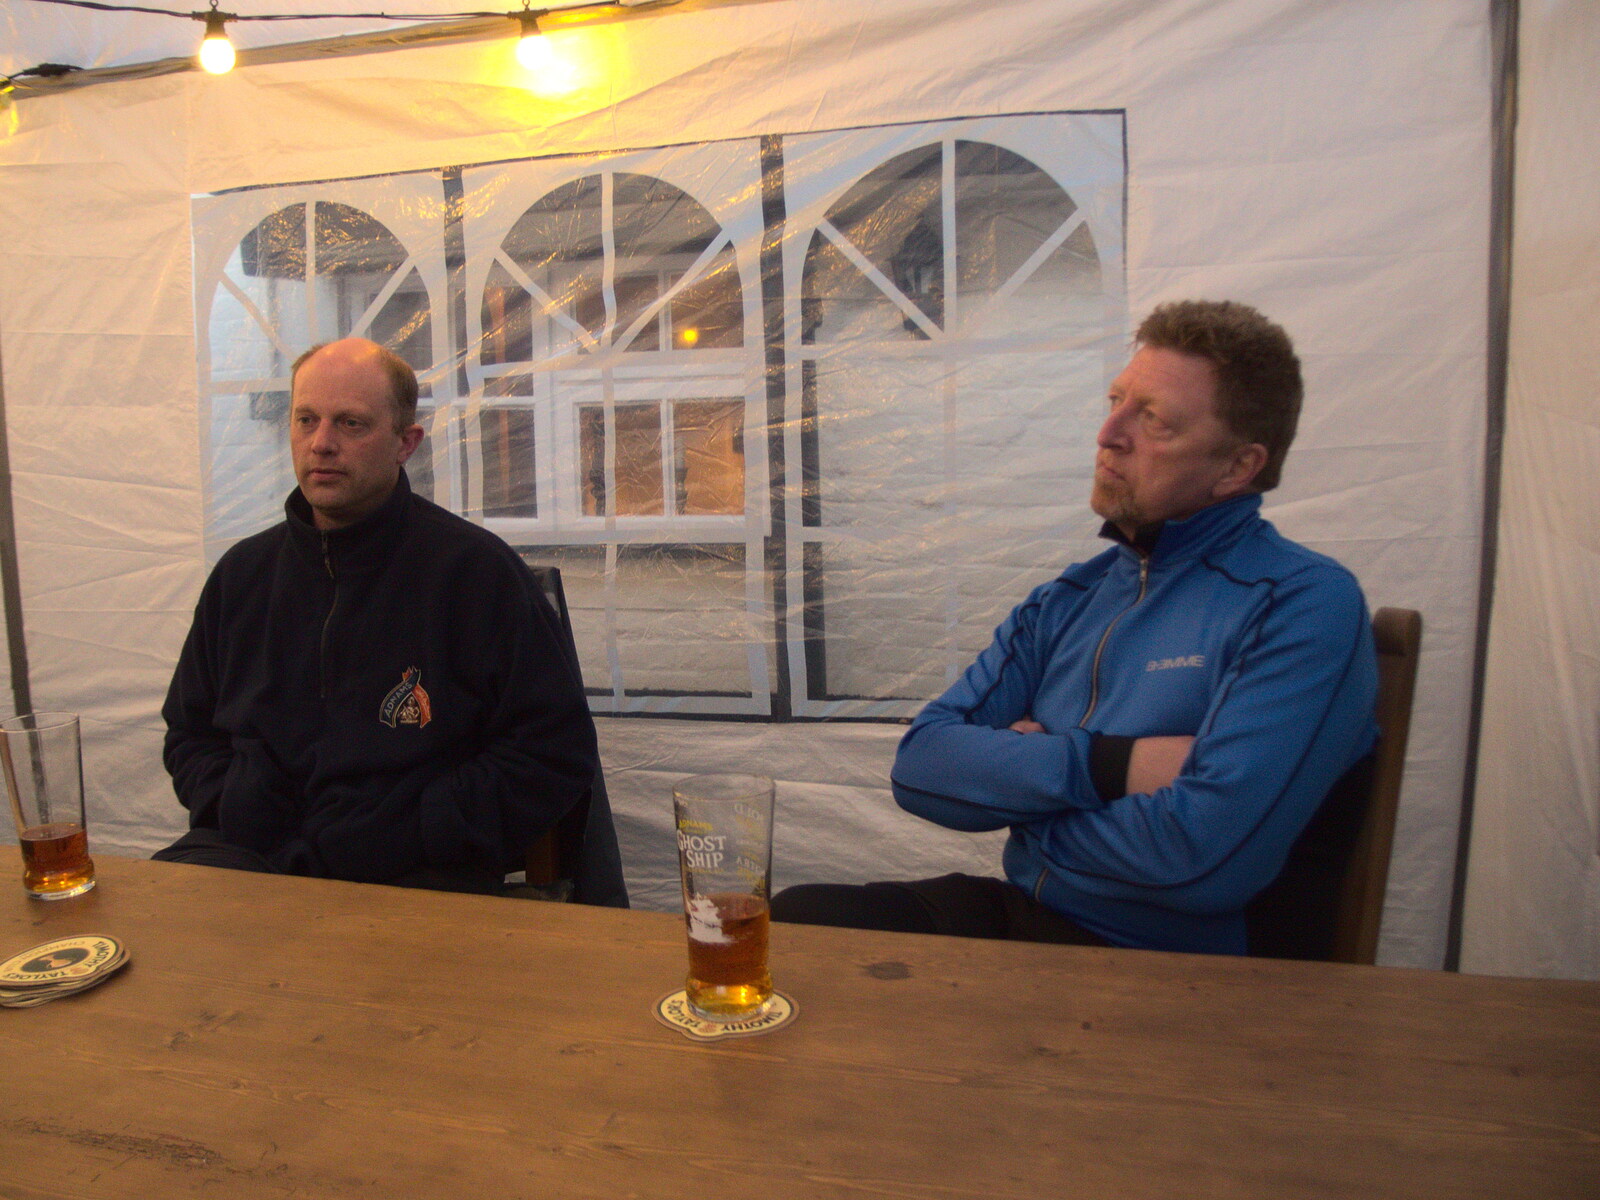 Paul and Gaz from BSCC Beer Garden Hypothermia, Hoxne and Brome, Suffolk - 22nd April 2021